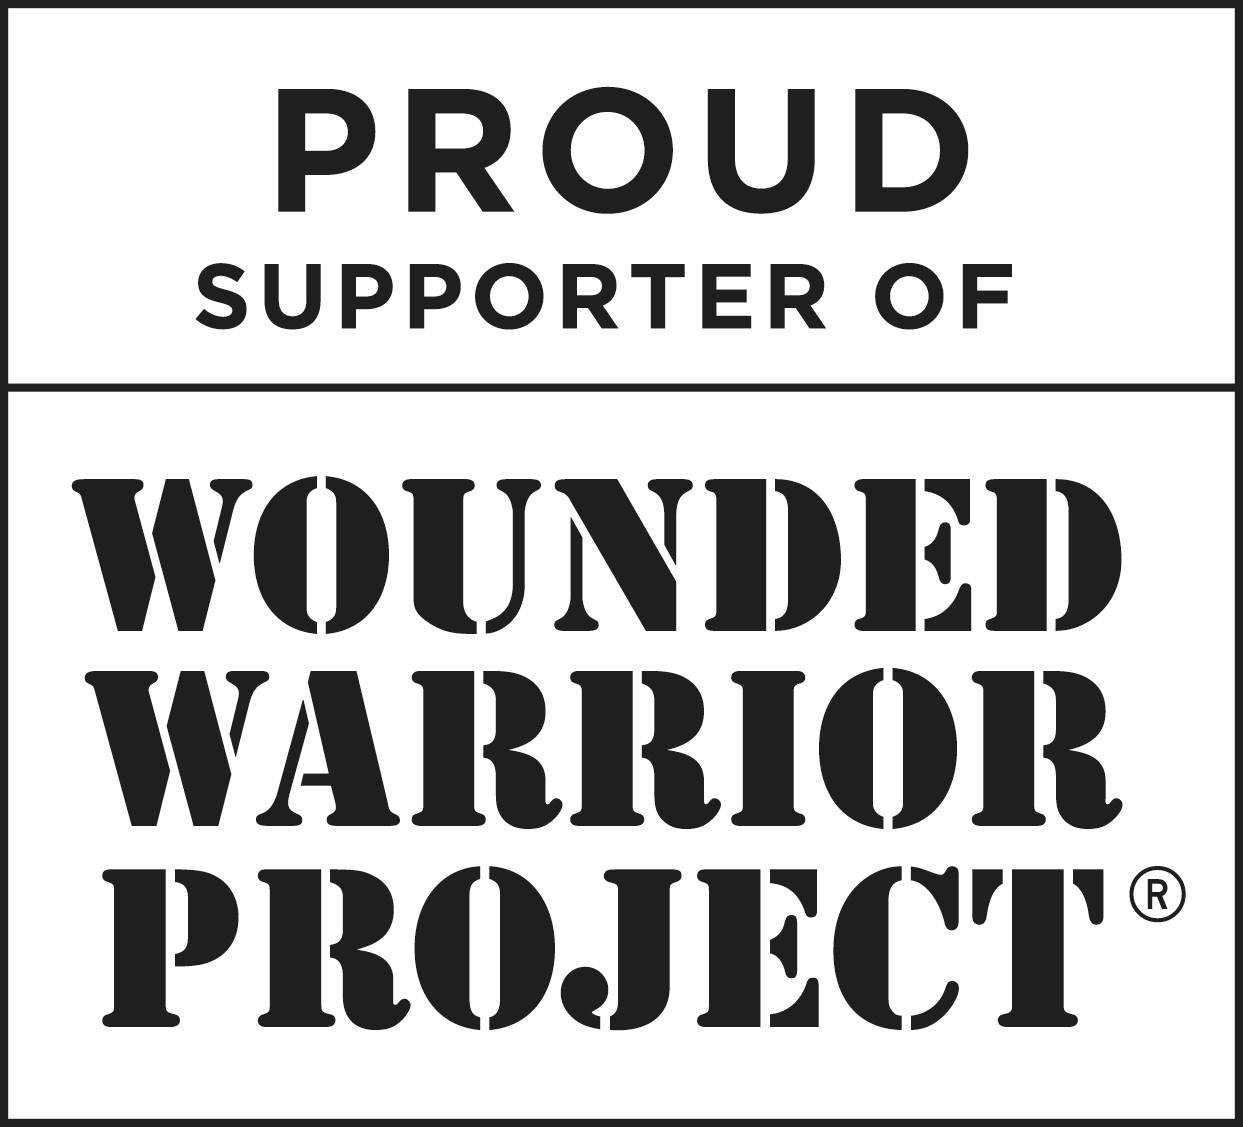 Proud Supporter of Wounded Warrior Project logo